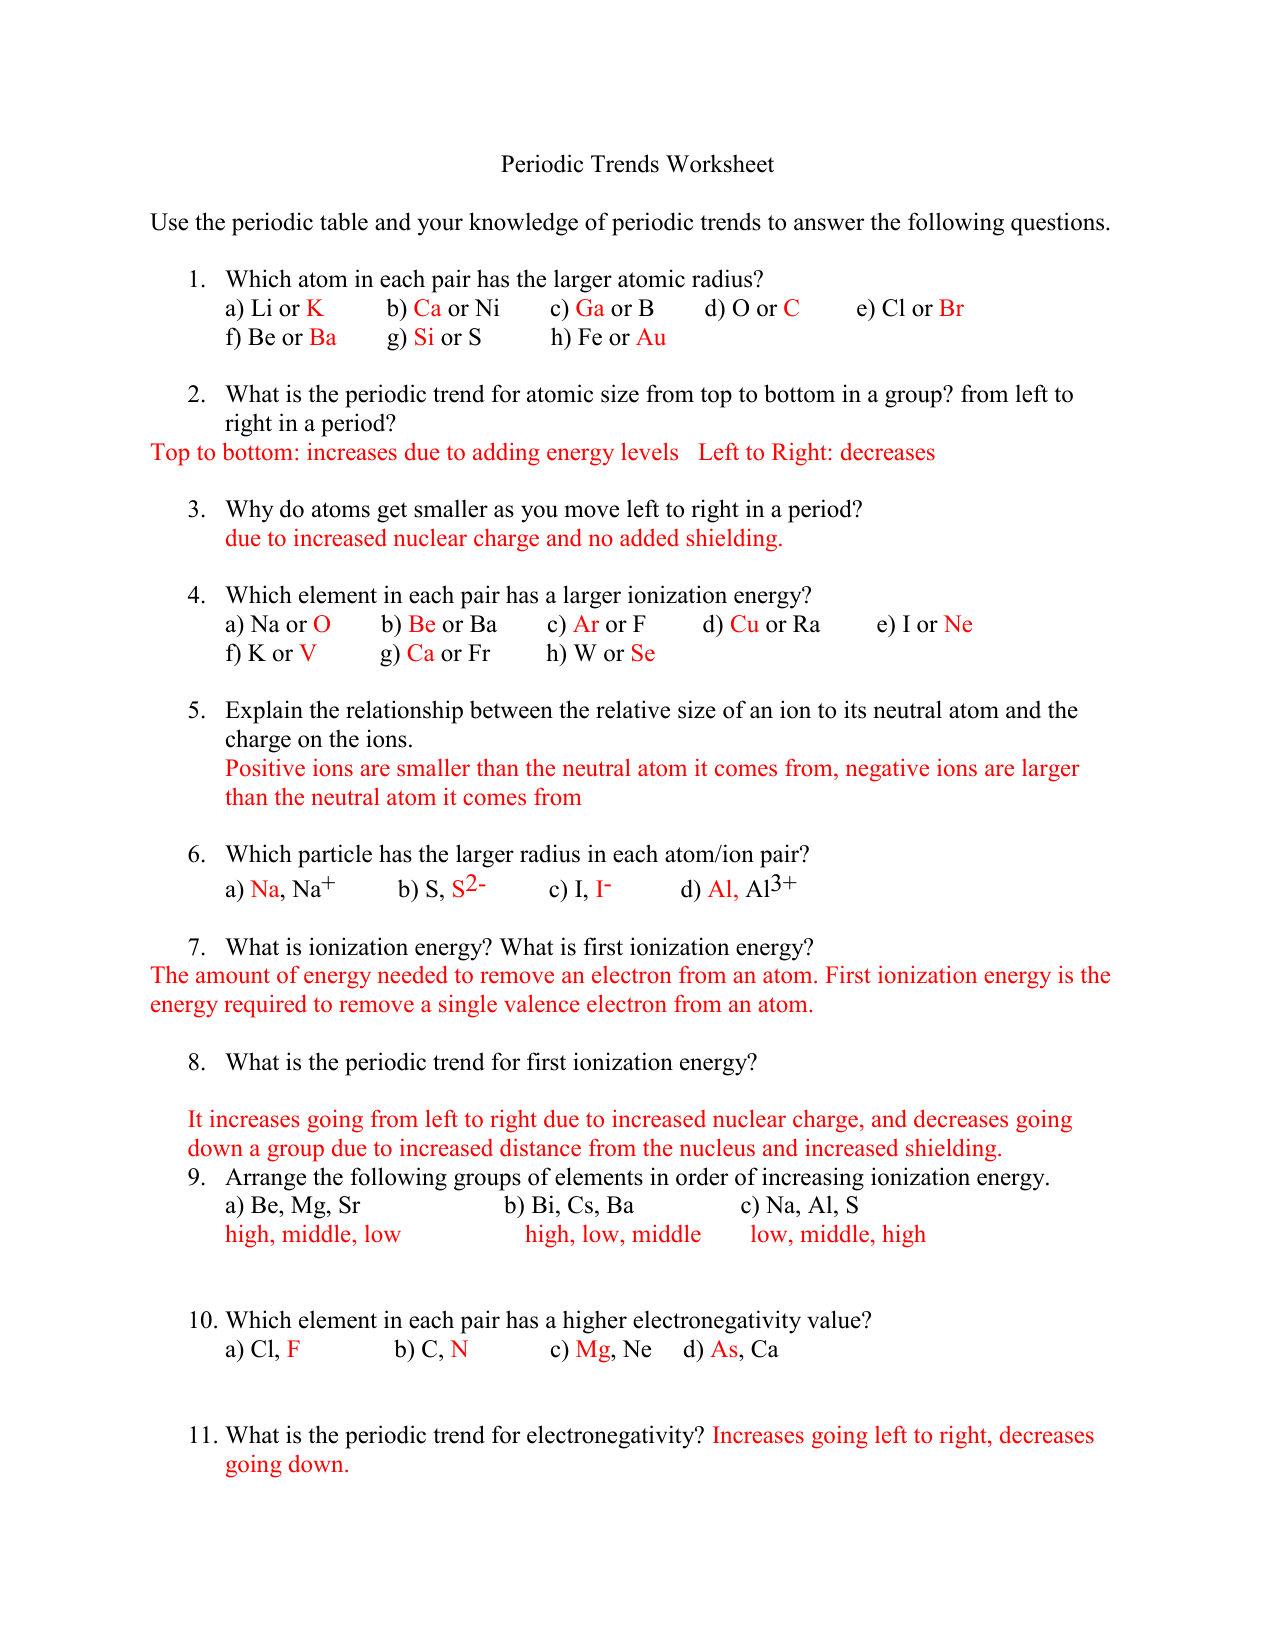 Periodic Trends Worksheet 22 answers Intended For Periodic Trends Worksheet Answers